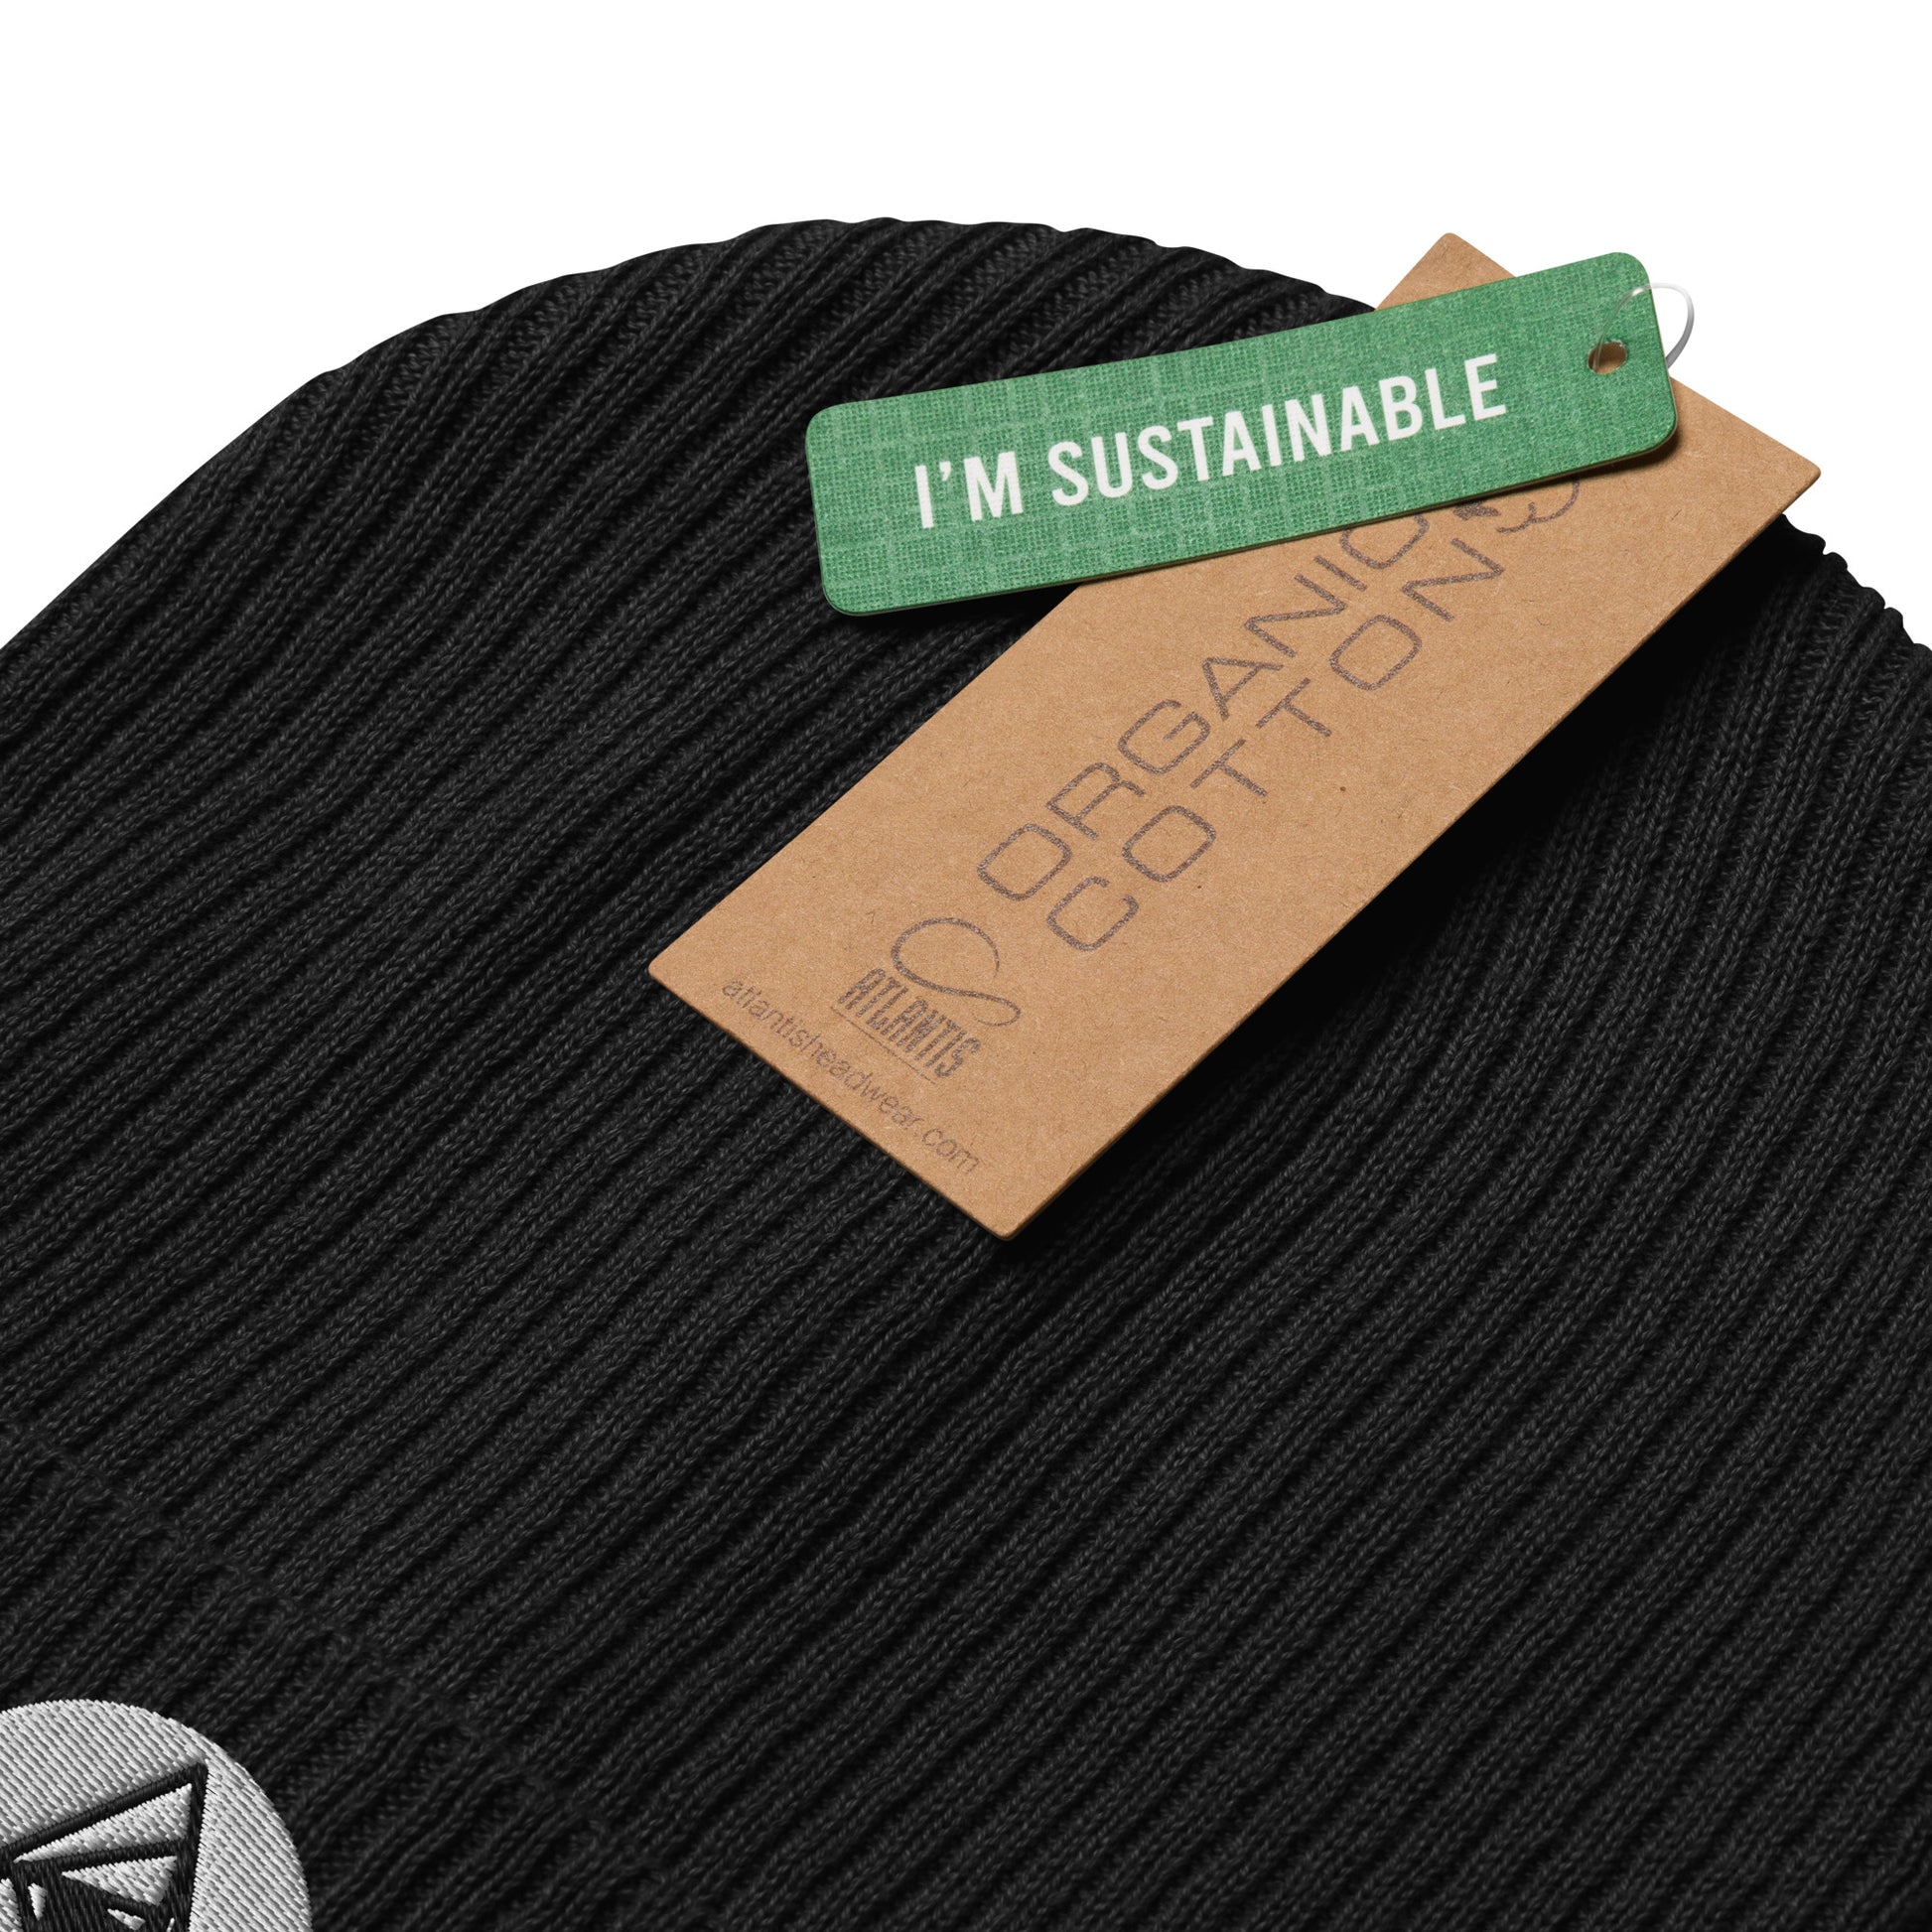 Behold, our Spiraling Equilateral Triangles Beanie in midnight black —a garment of cosmic significance. Crafted from organic cotton and adorned with a mesmerizing Spiraling Equilateral Triangles embroidery, it's not your run-of-the-mill hat. with a label of "I'M SUSTAINBLE"